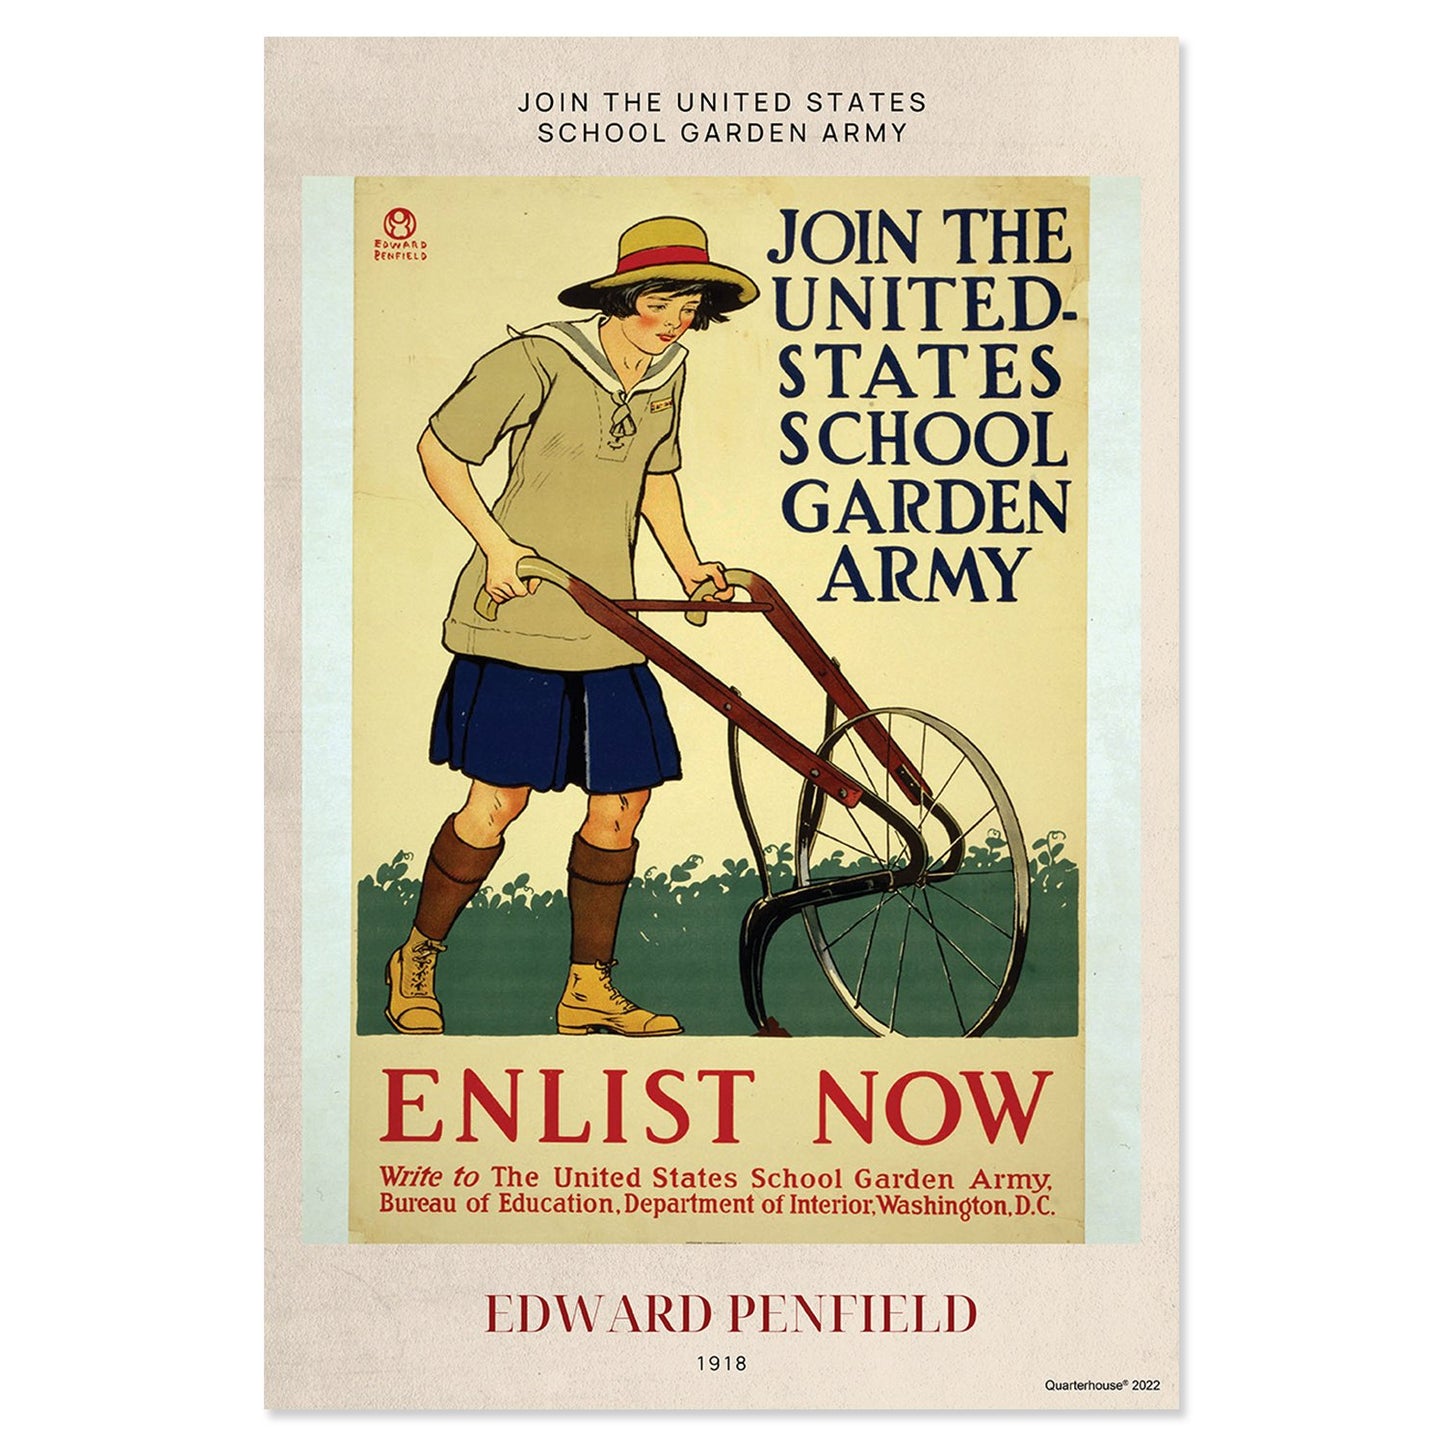 Quarterhouse WWI, 'Join the United States School Garden Army' Poster, Social Studies Classroom Materials for Teachers